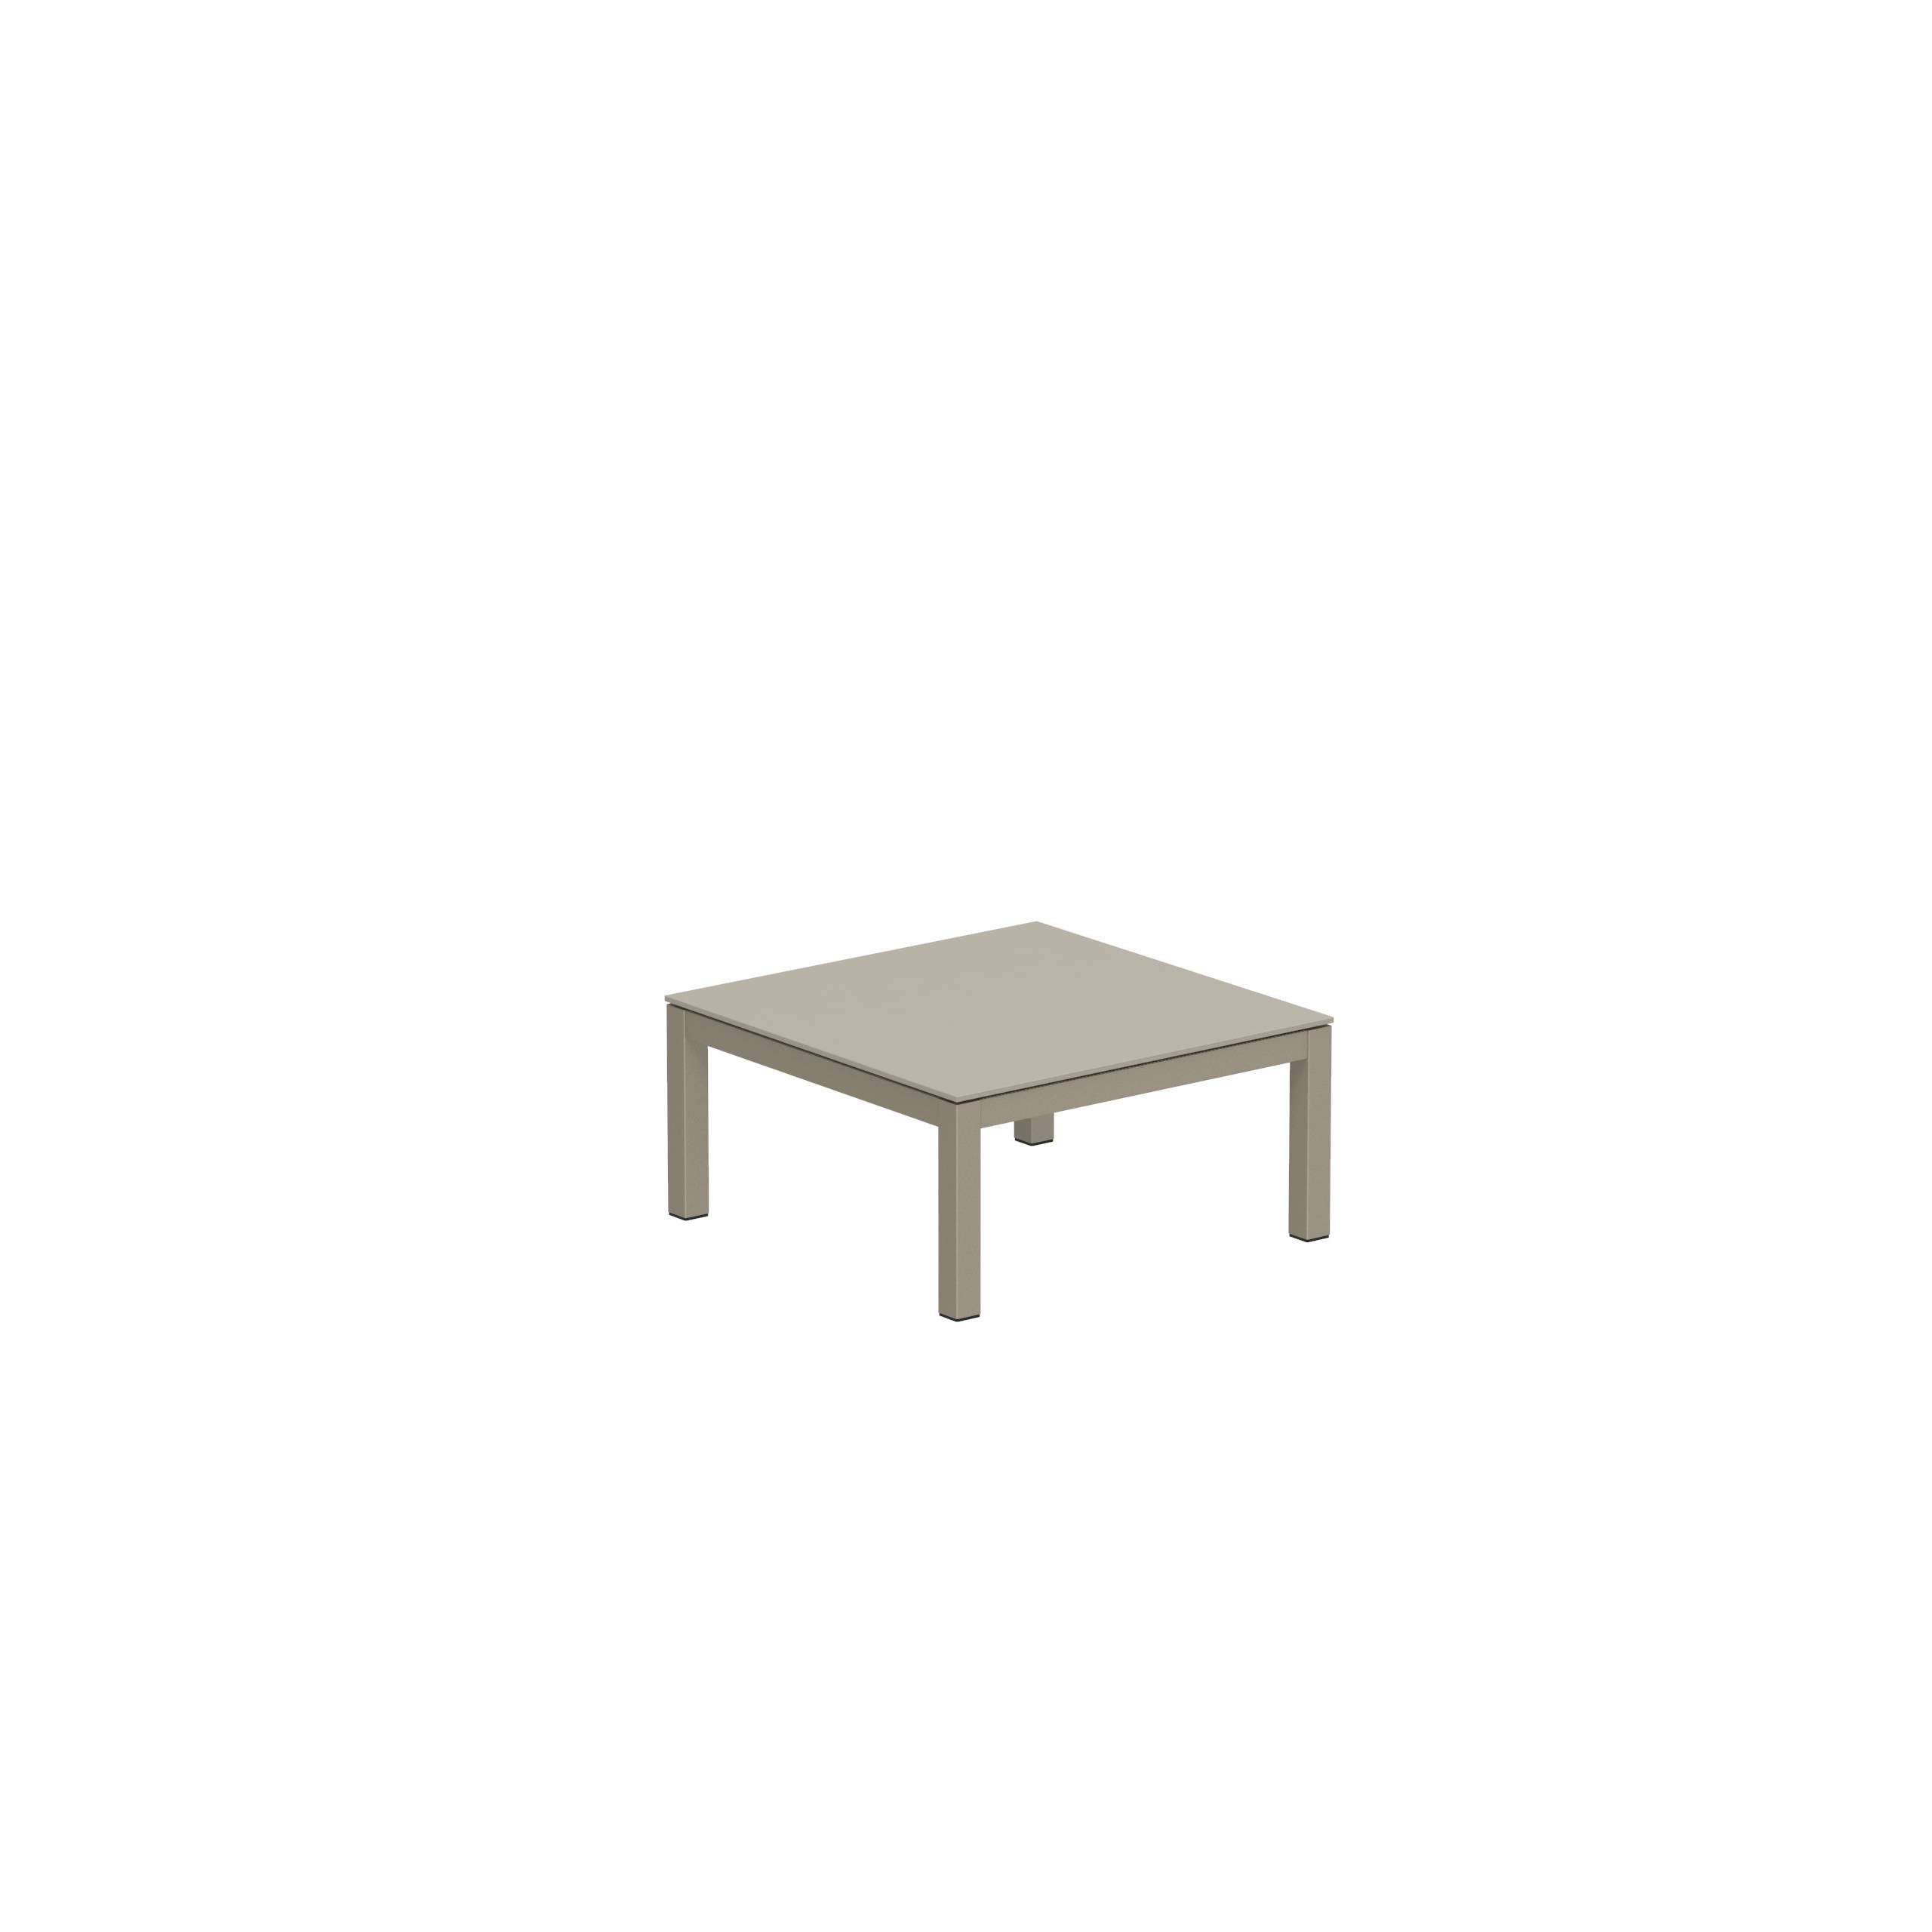 Taboela Low Table 80x80cm Sand With Ceramic Tabletop Pearl Grey